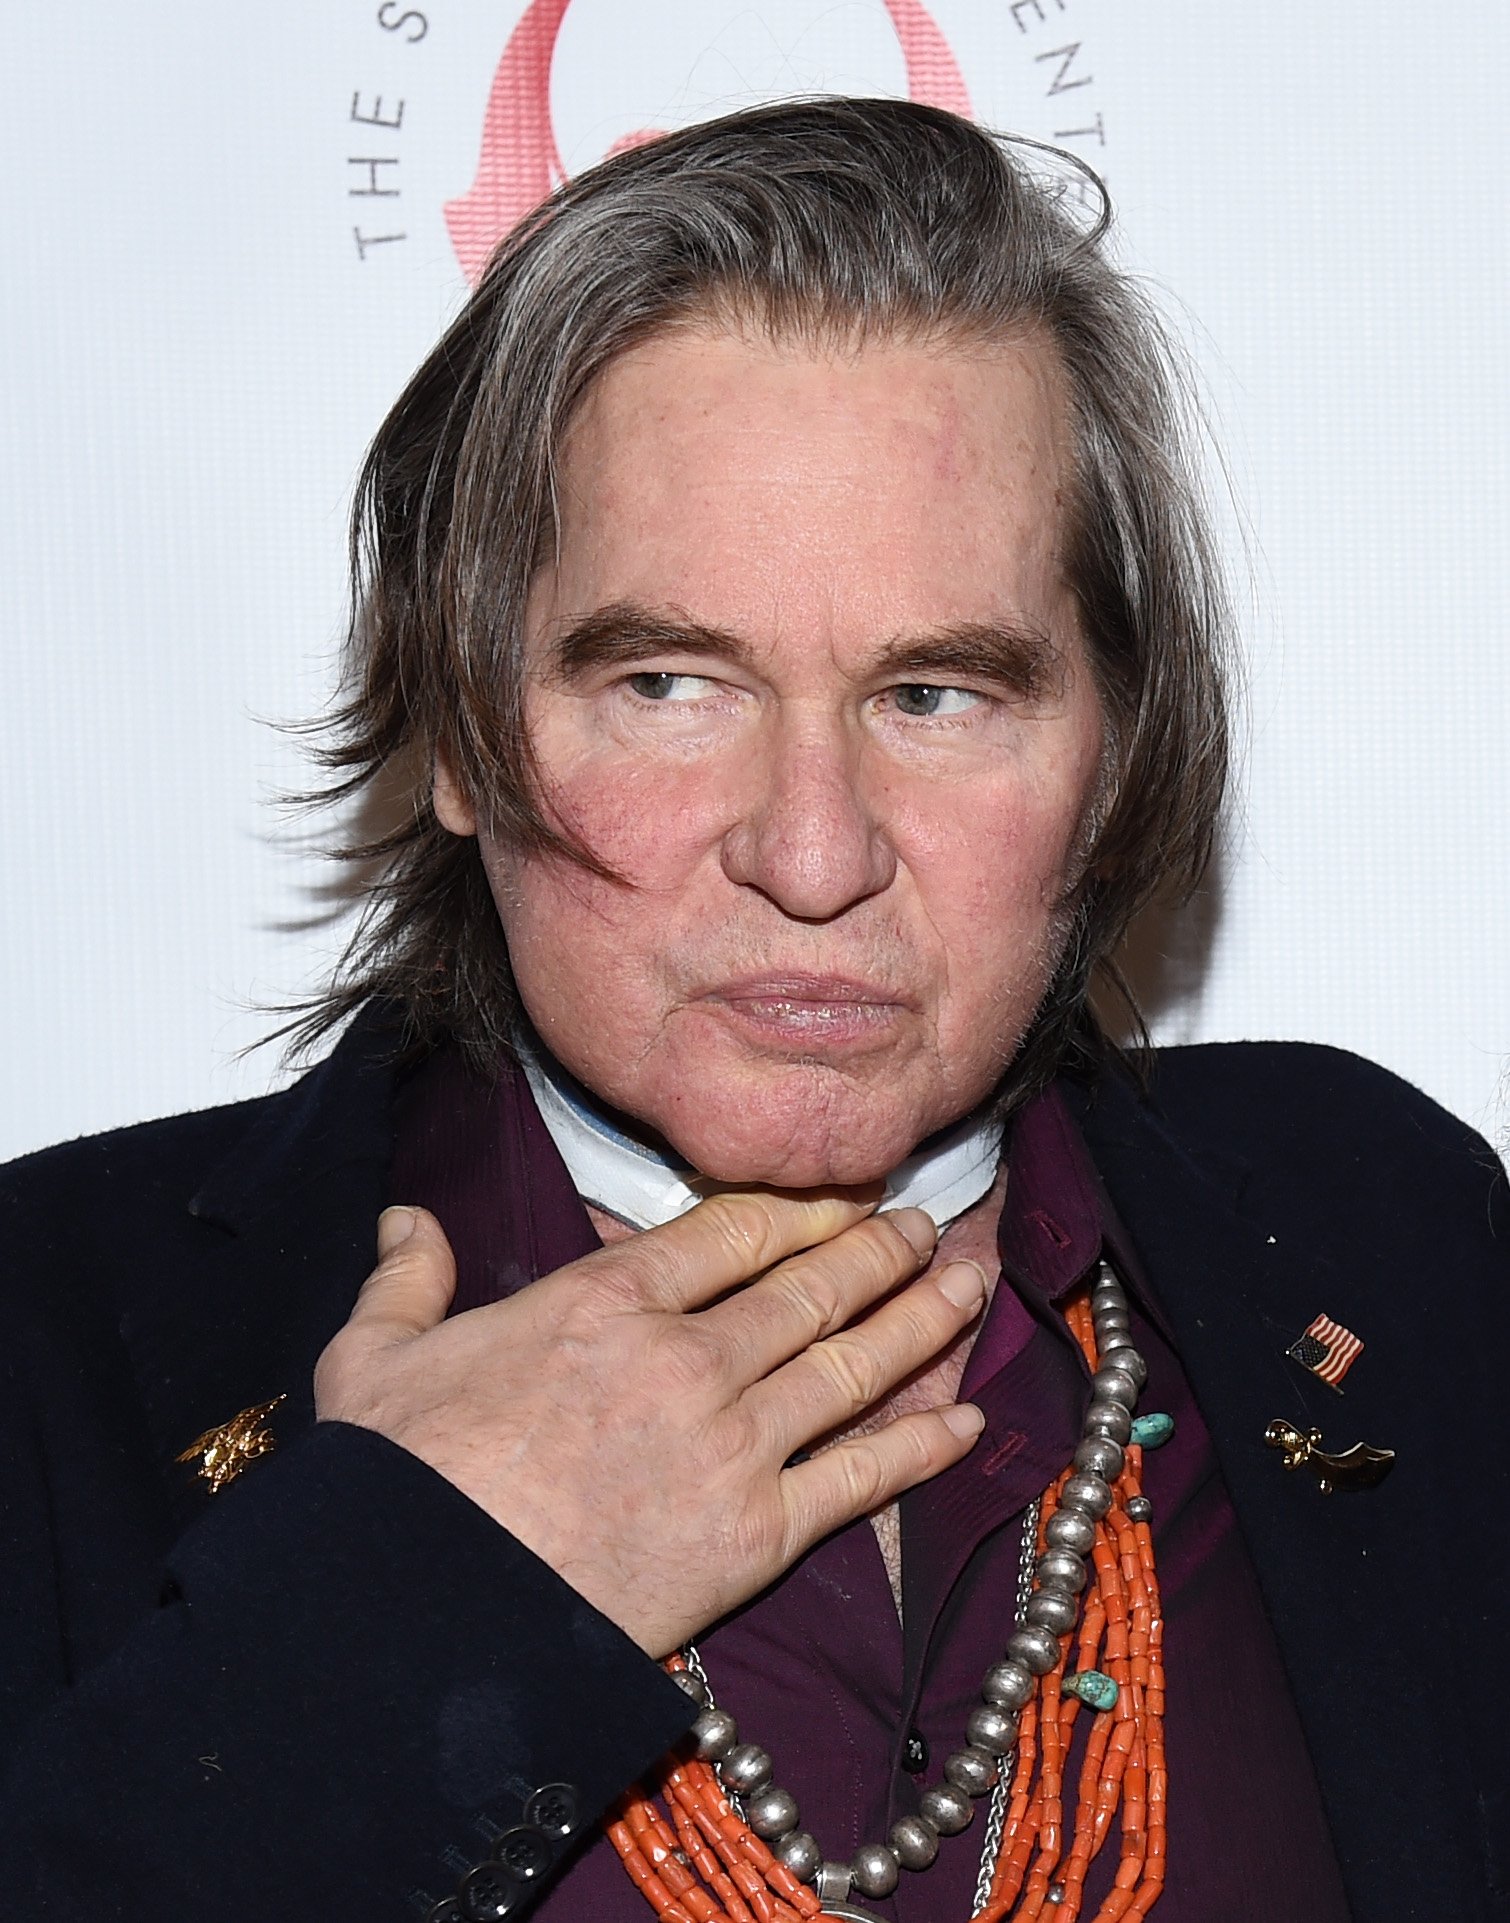 Val Kilmer attends the Simply Shakespeare's Live Read of "The Merchant Of Venice" at Walt Disney Concert Hall on October 28, 2019 in Los Angeles, California. | Source: Getty Images